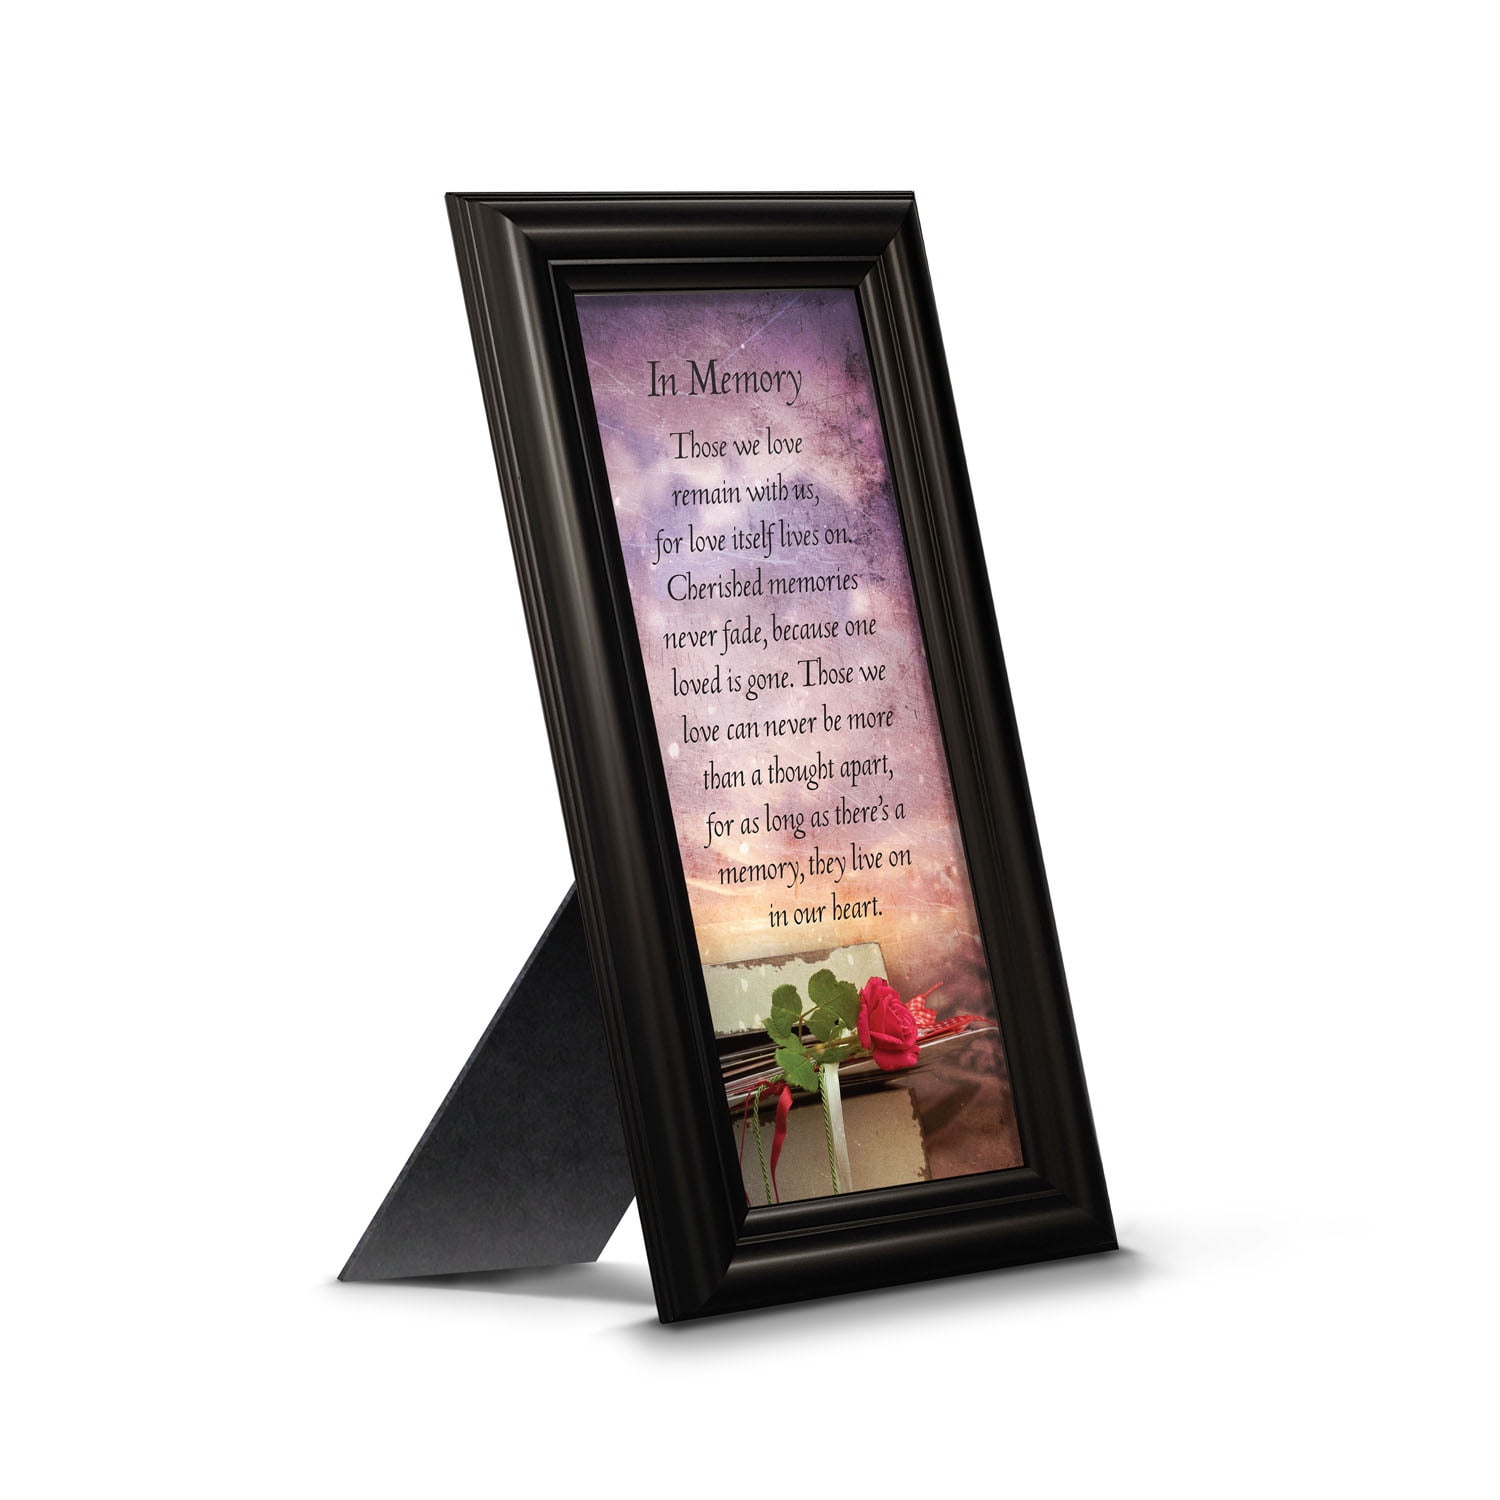 In Memory of Loved One, Memorial Gifts Picture Frames, Bereavement Gifts for Sympathy Baskets or Condolence Card, Sympathy Gifts for Loss of Mother, Loss of Father Gift, In Memory Framed Poem, 7381B